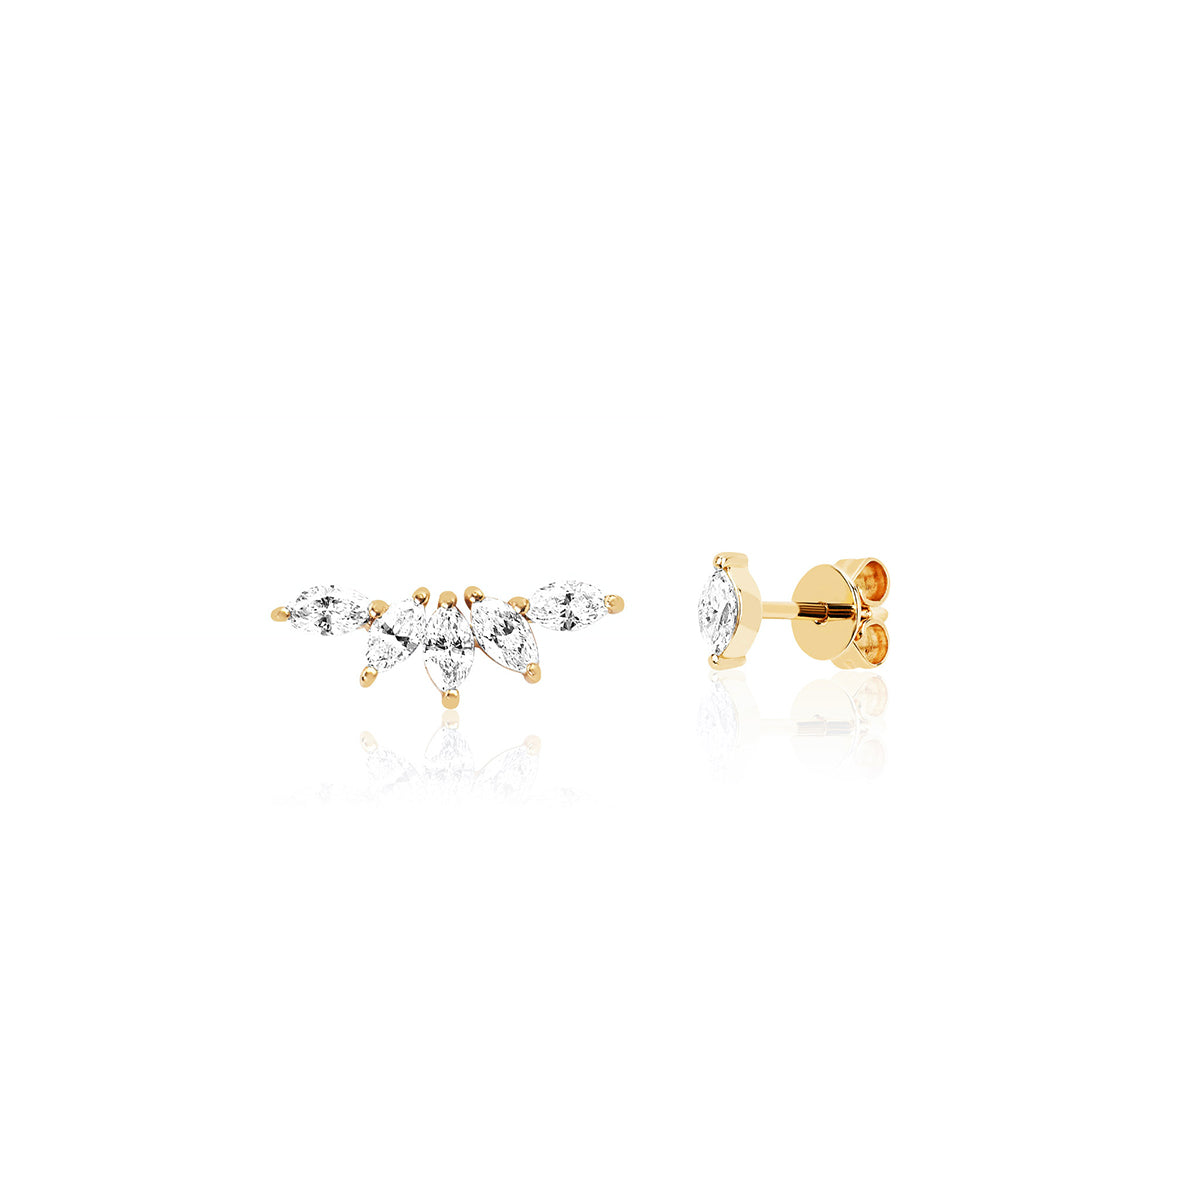 The Marquise Set in 14k Yellow Gold featuring 1 Diamond Marquise Fan Stud & 1 of Diamond Marquise Stud